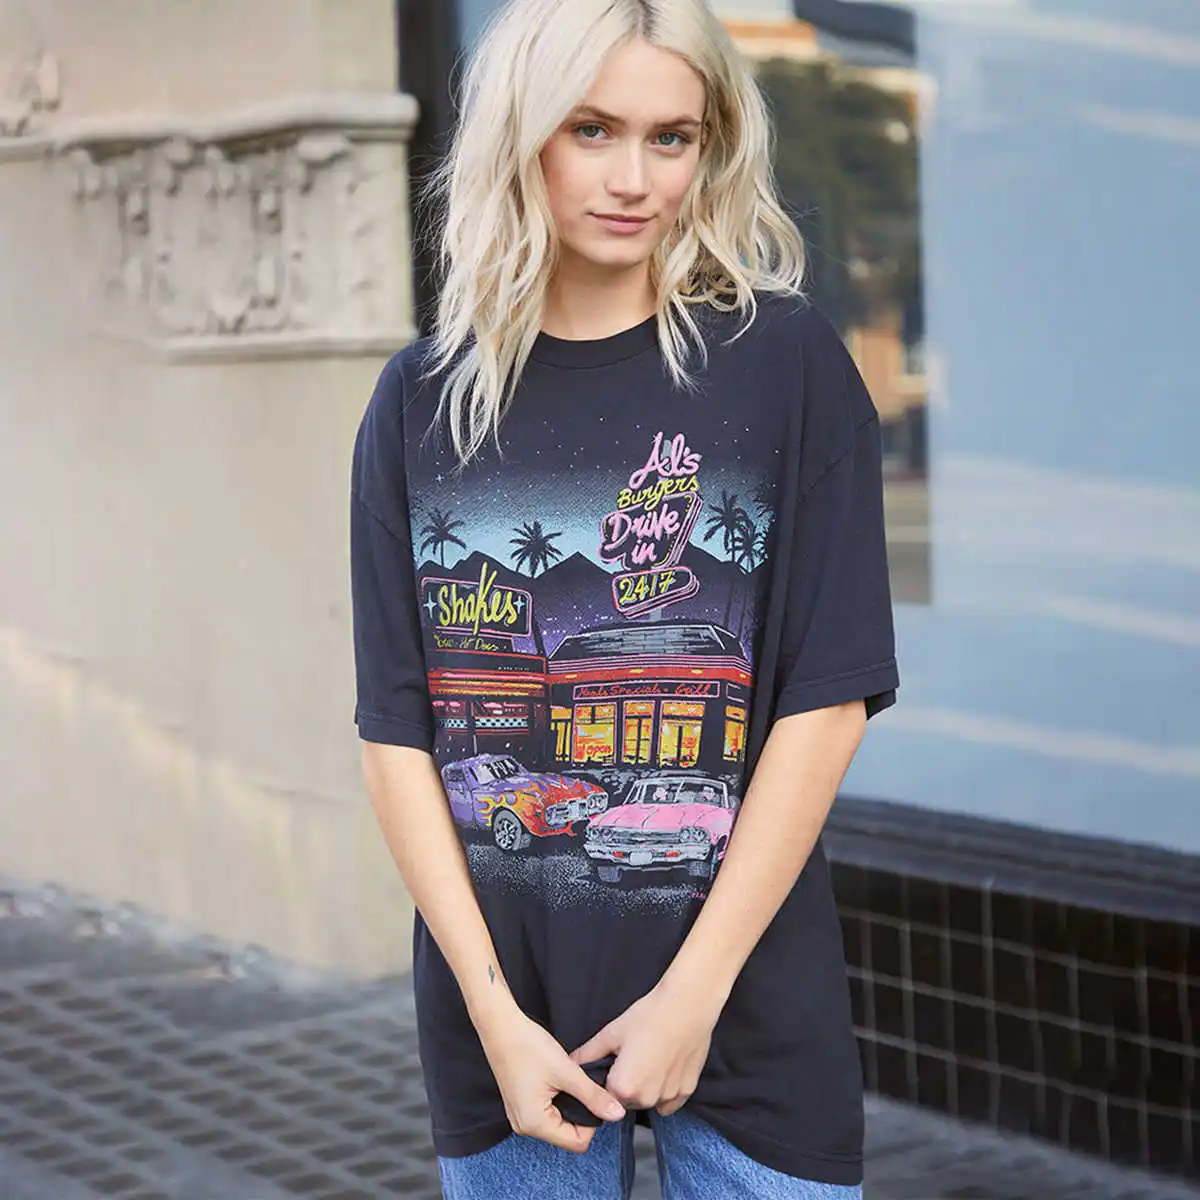 Colleague All compression Harajuku Oversized Graphic Tees Vintage Tshirts Women - Buy Graphic T  Shirts Vintage,Graphic Tees Vintage T Shirts Women,Vintage Oversized  Graphic T Shirts Product on Alibaba.com